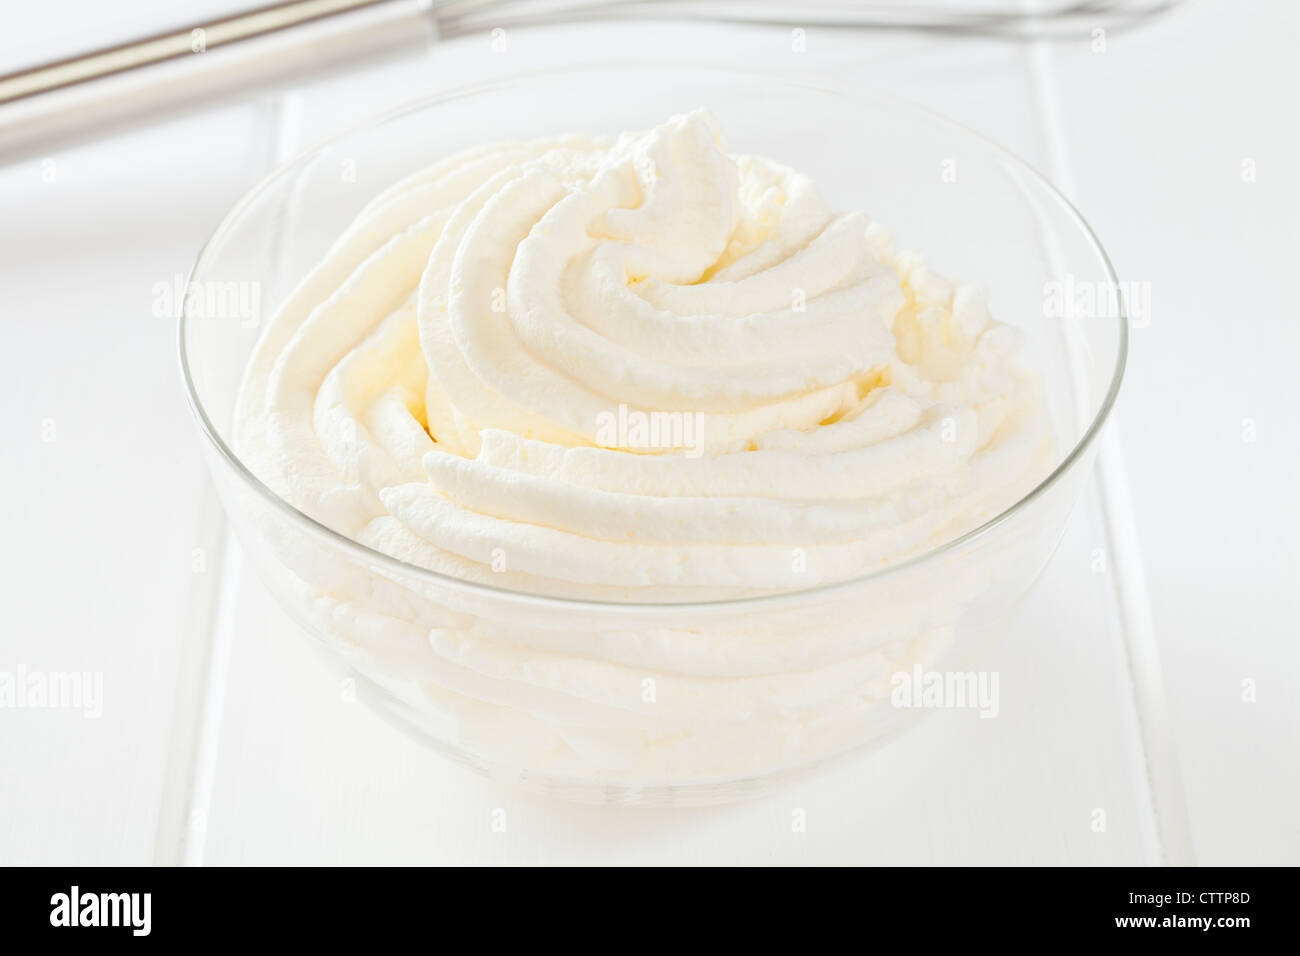 A bowl of whipped cream on a light surface. Stock Photo